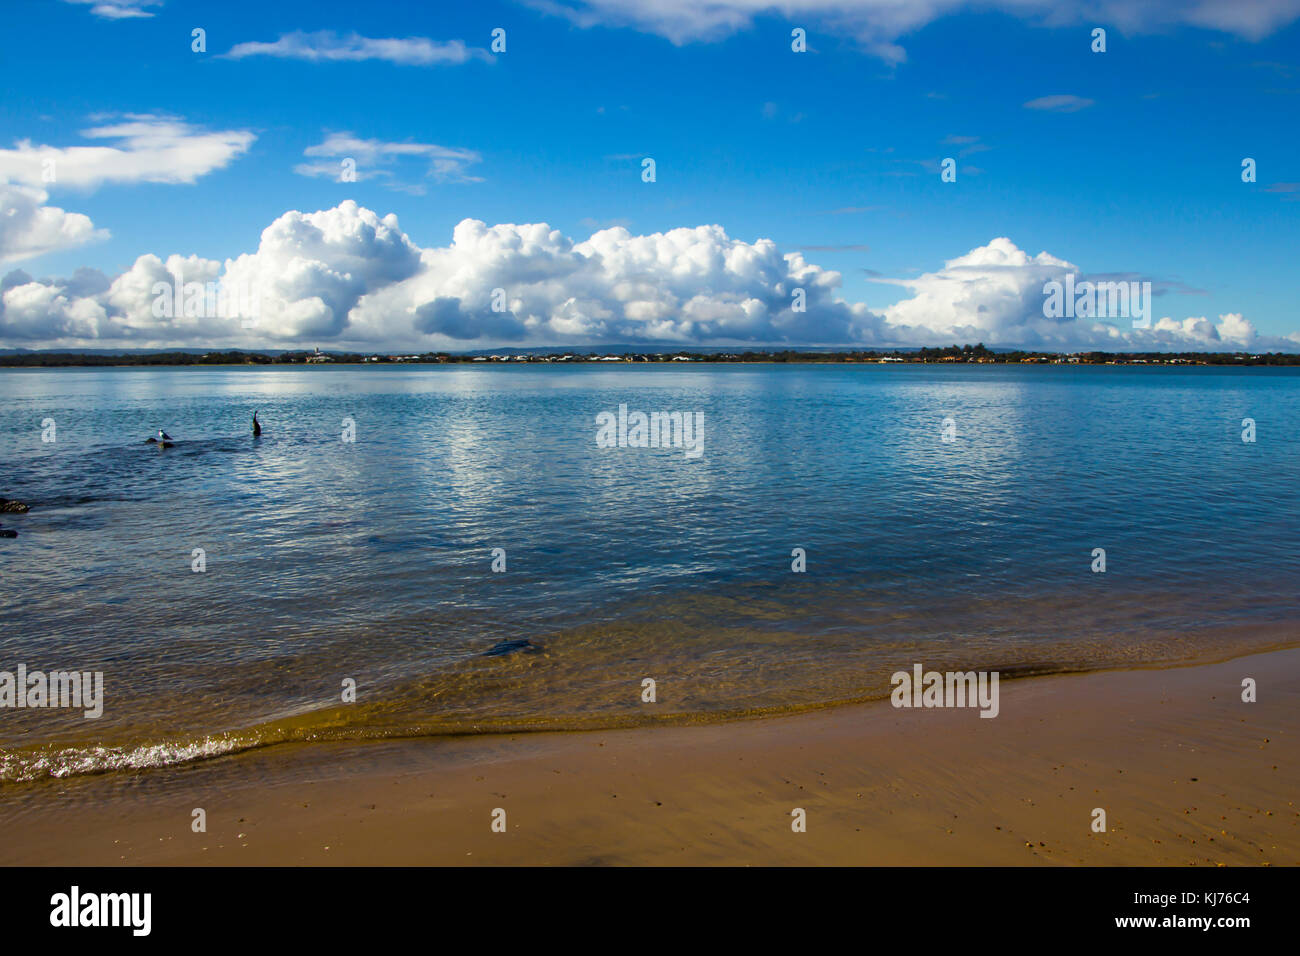 Tranquil  view of the landscape from  a rocky groyne at the Cut  where Leschenault Estuary enters the Indian ocean  near Australind Western Australia. Stock Photo